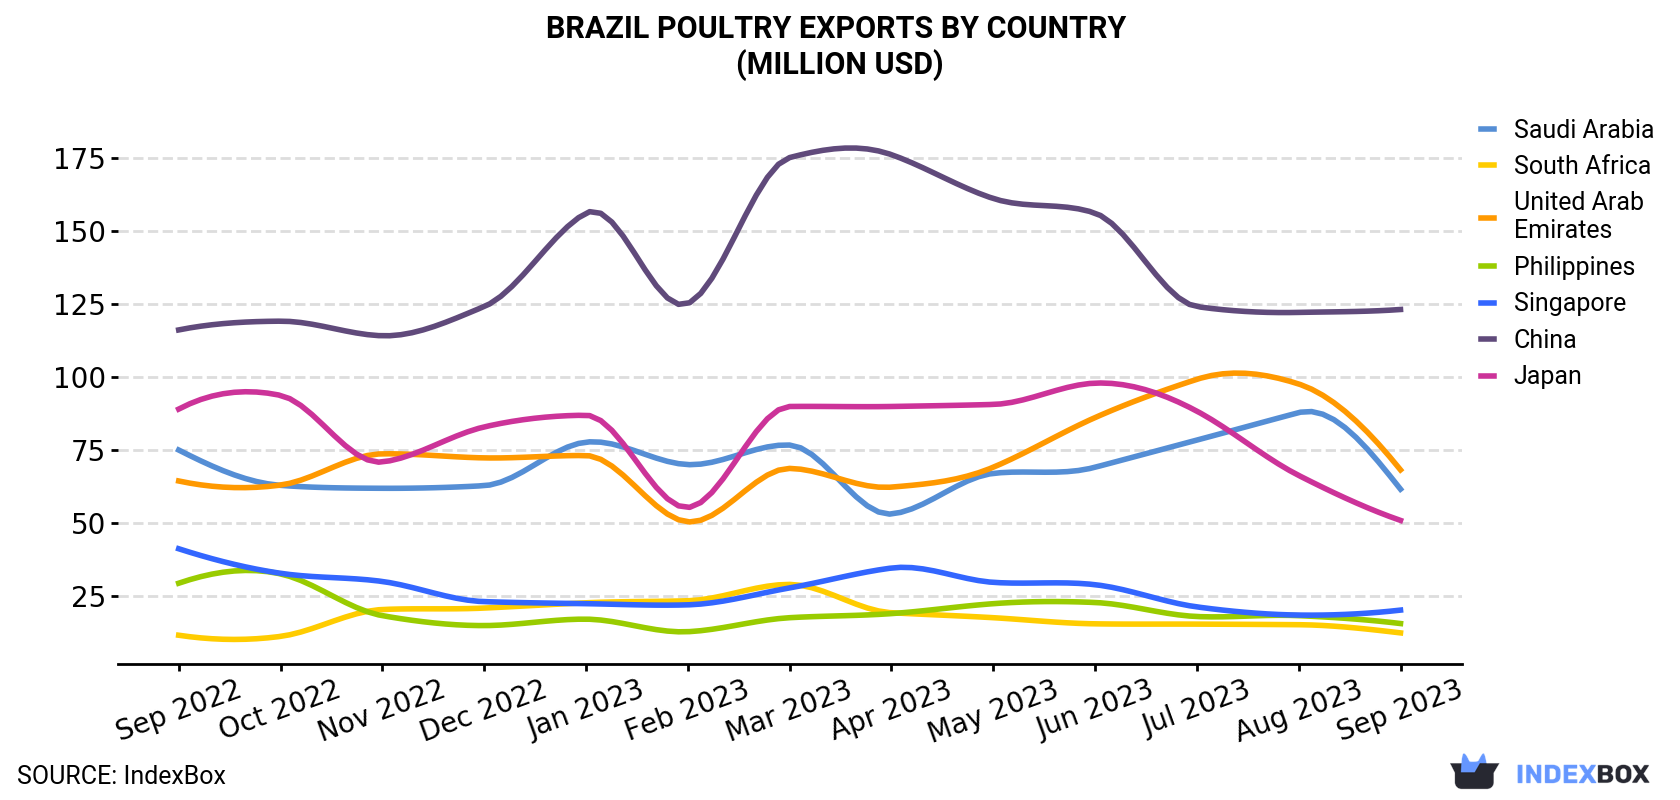 Brazil Poultry Exports By Country (Million USD)